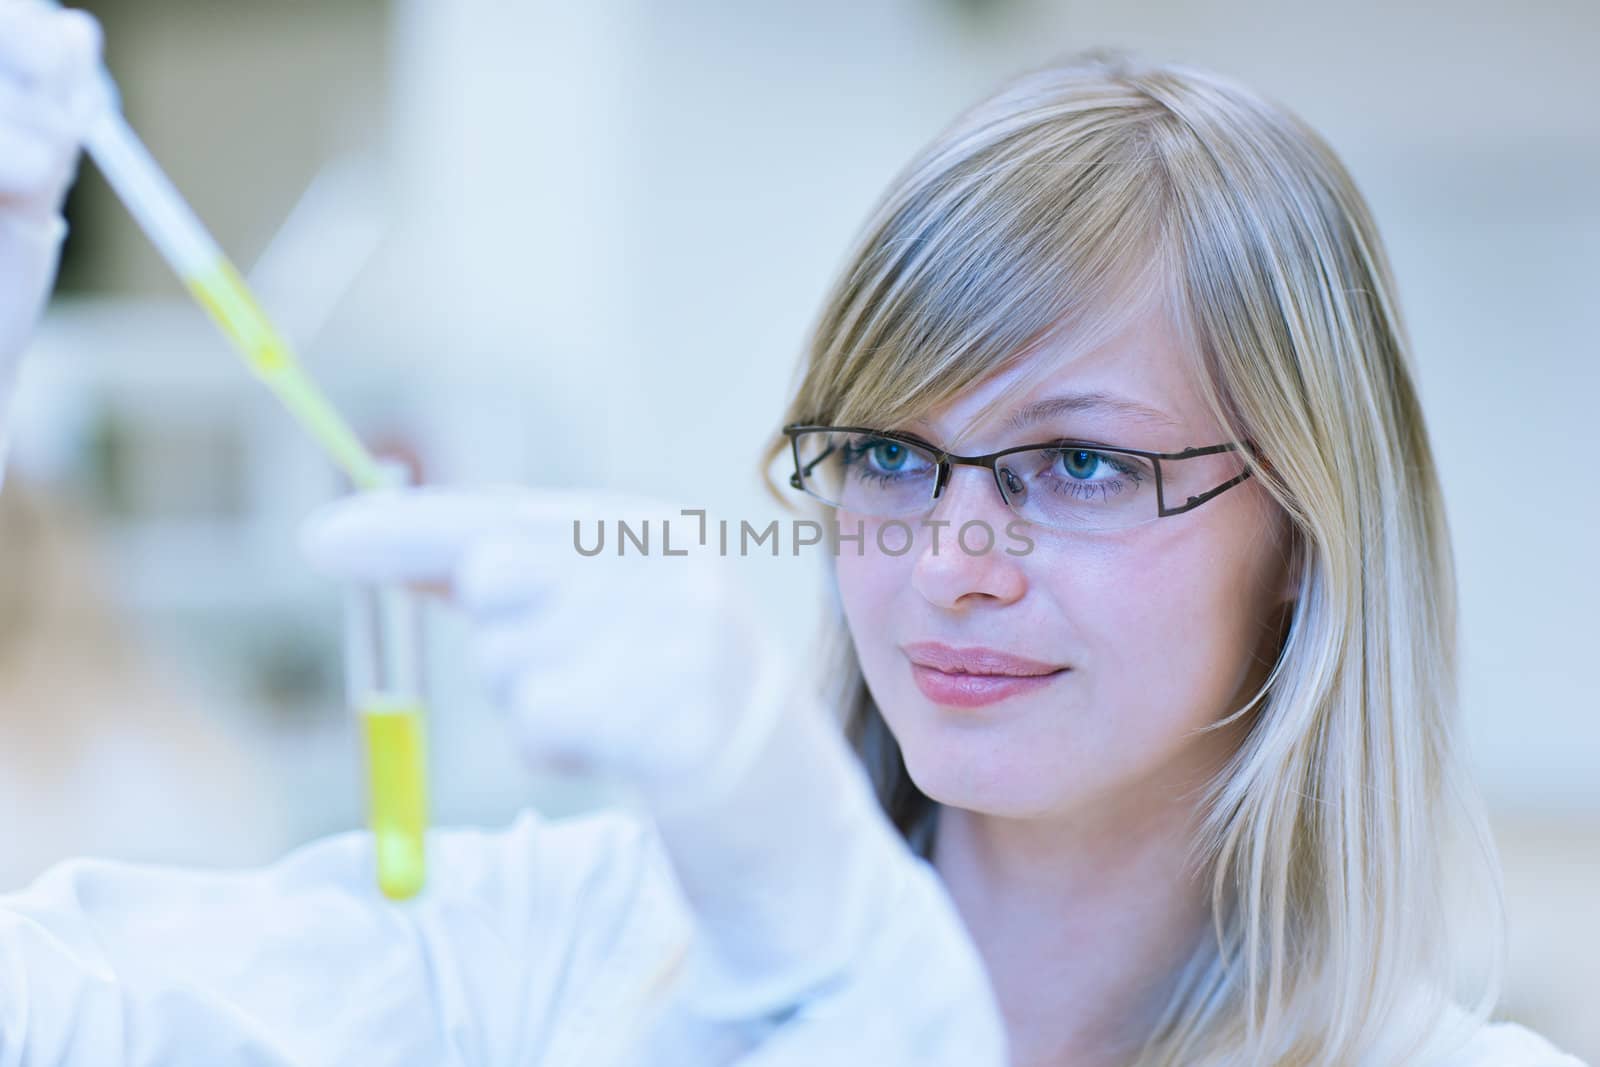 female researcher carrying out research in a chemistry lab by viktor_cap